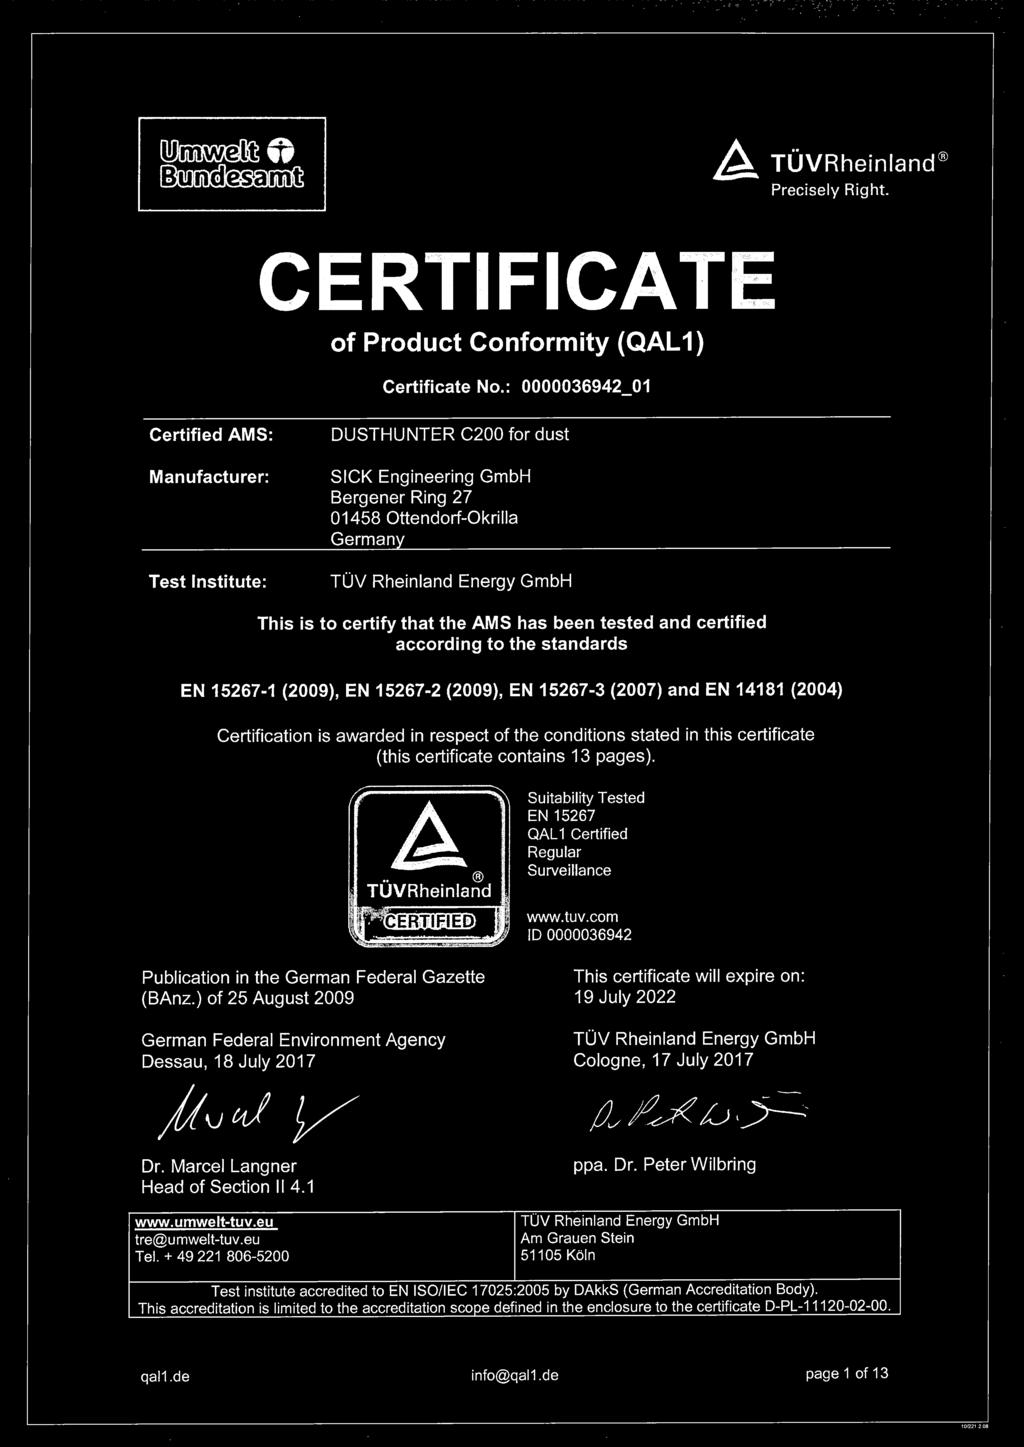 certify that the AMS has been tested and certified according to the standards EN 15267-1 (2009), EN 15267-2 (2009), EN 15267-3 (2007) and EN 14181 (2004) Certification is awarded in respect of the